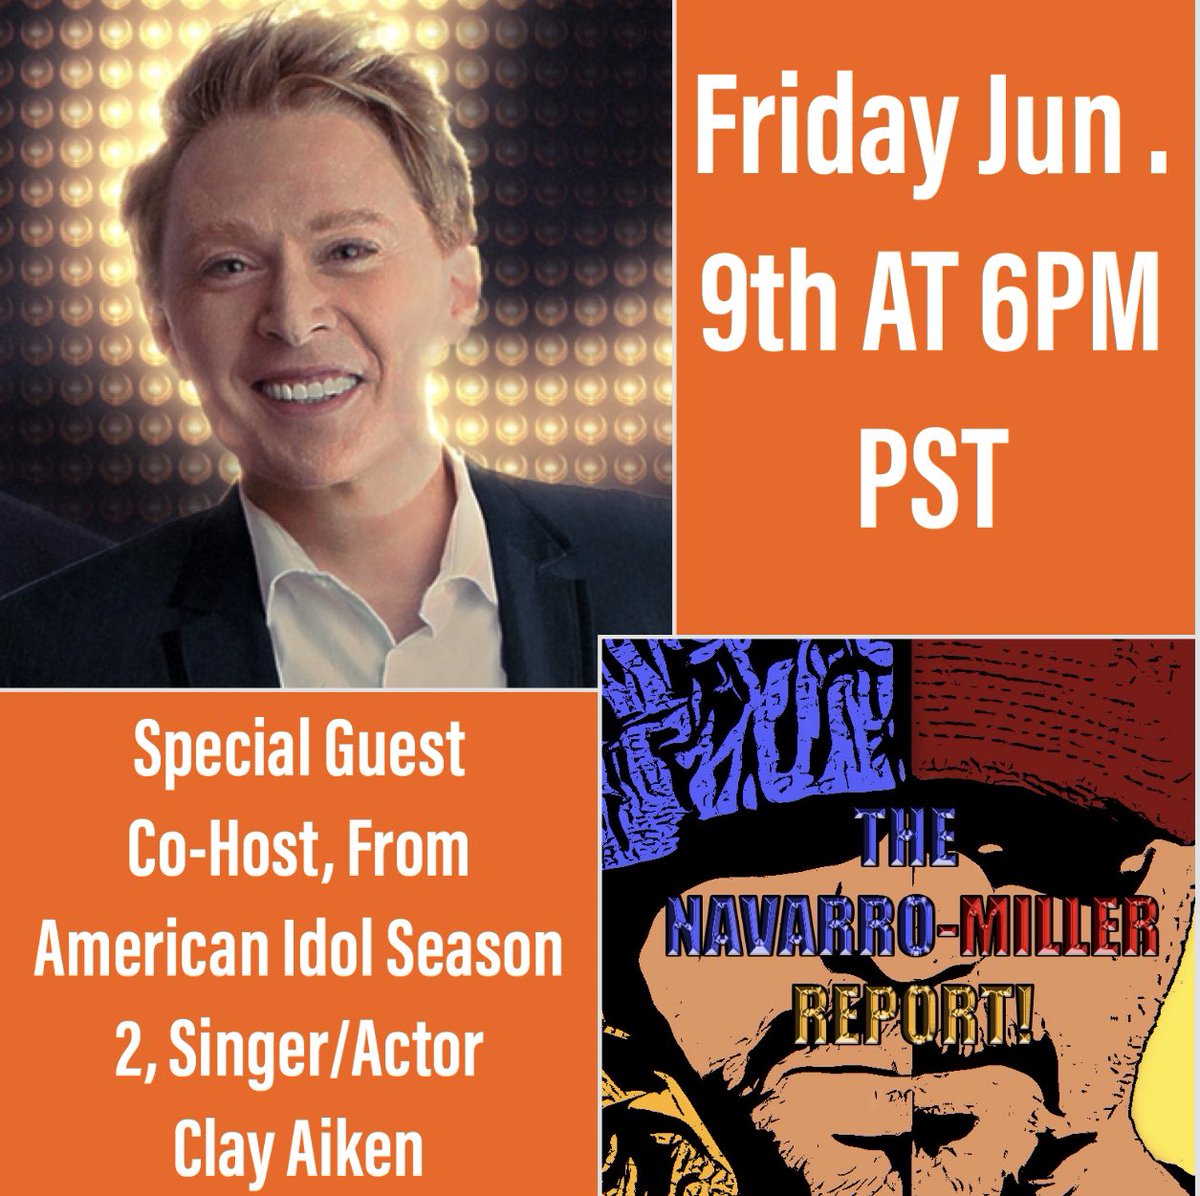 Tune in today here on Twitter at 6PM PST 9PM EST for another great episode of The Navarro-Miller Report. Today we have special guest co-host, from @americanidol season 2, actor/singer @clayaiken. We will be LIVE so feel free to join our interactive audience. #fyp #AmericanIdol